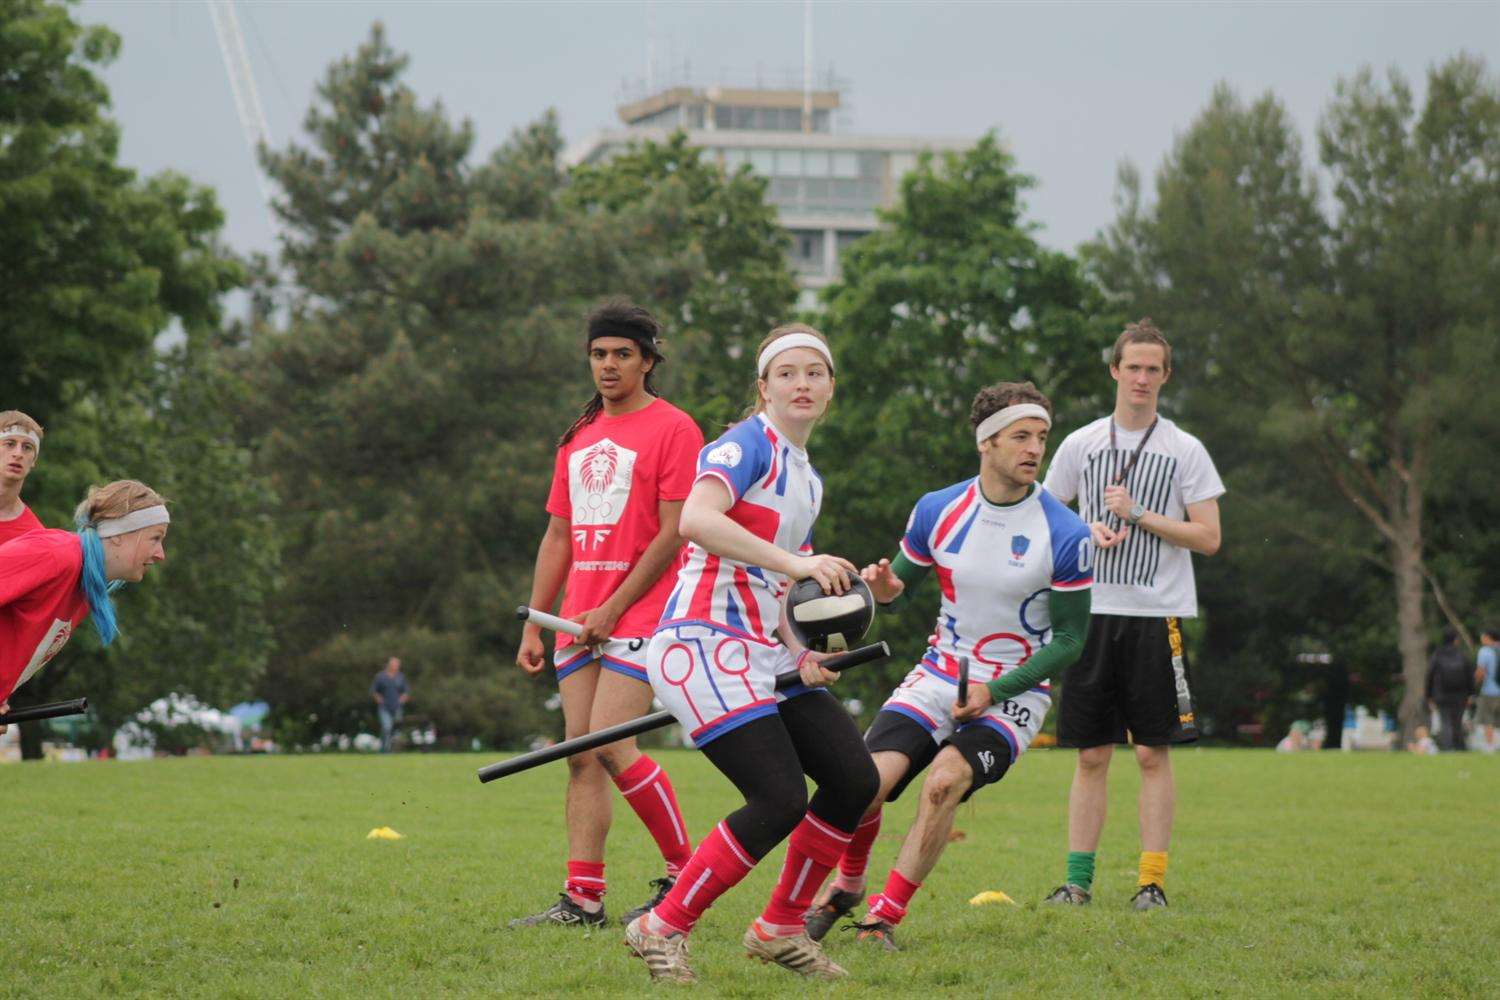 Jemma Thripp plays with the UK quidditch team